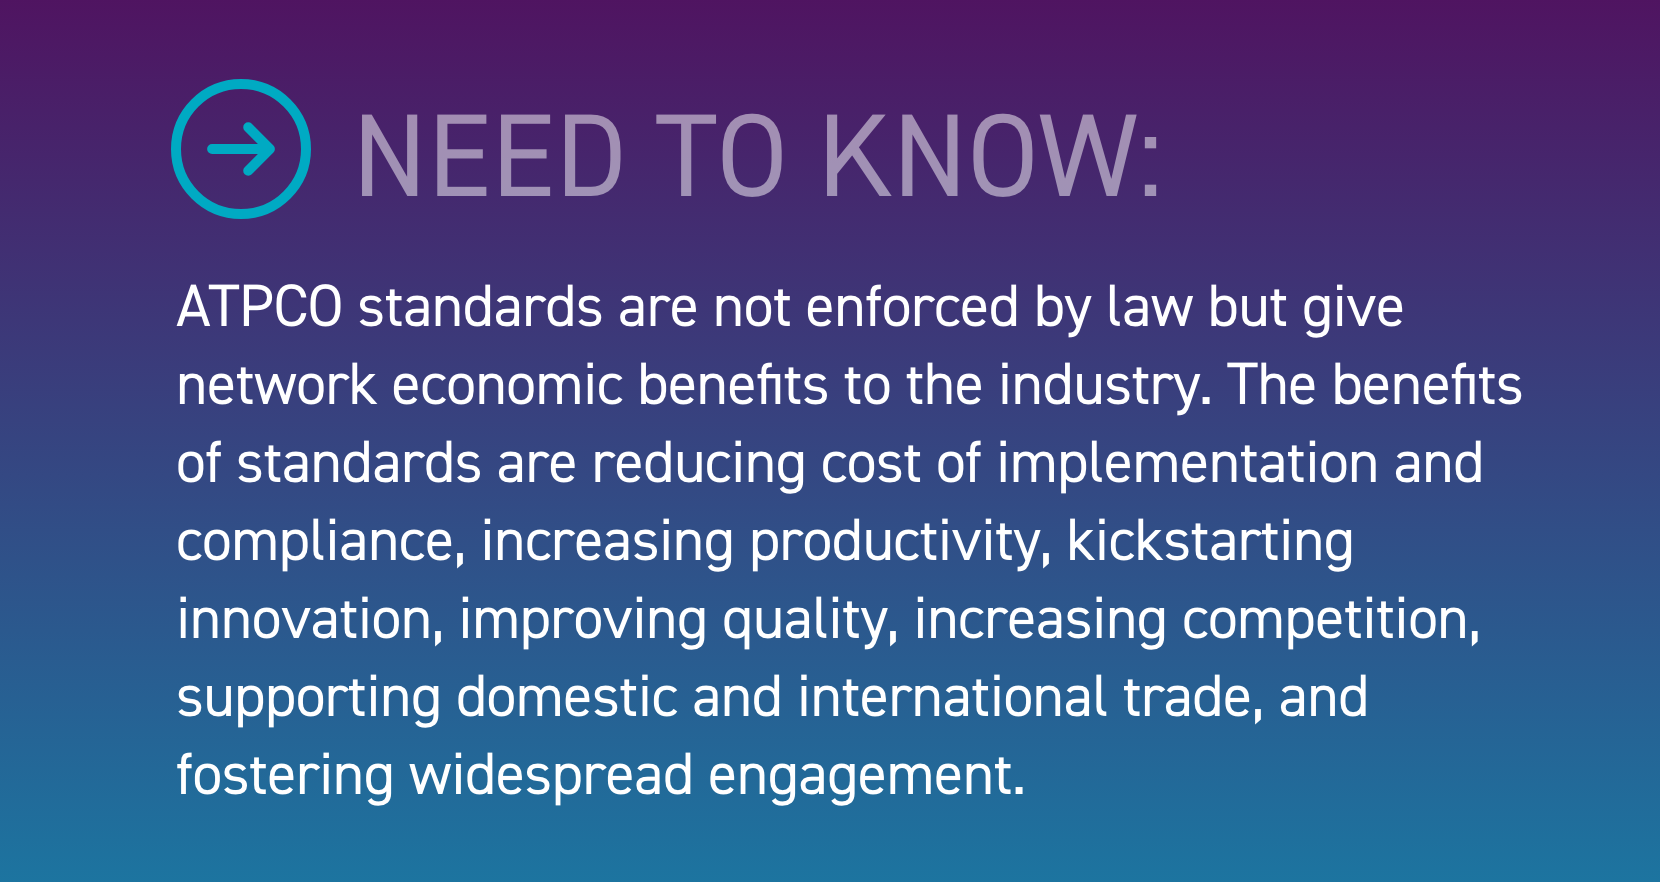 atpco standards are not enforced by law but give network economic benefits to the industry